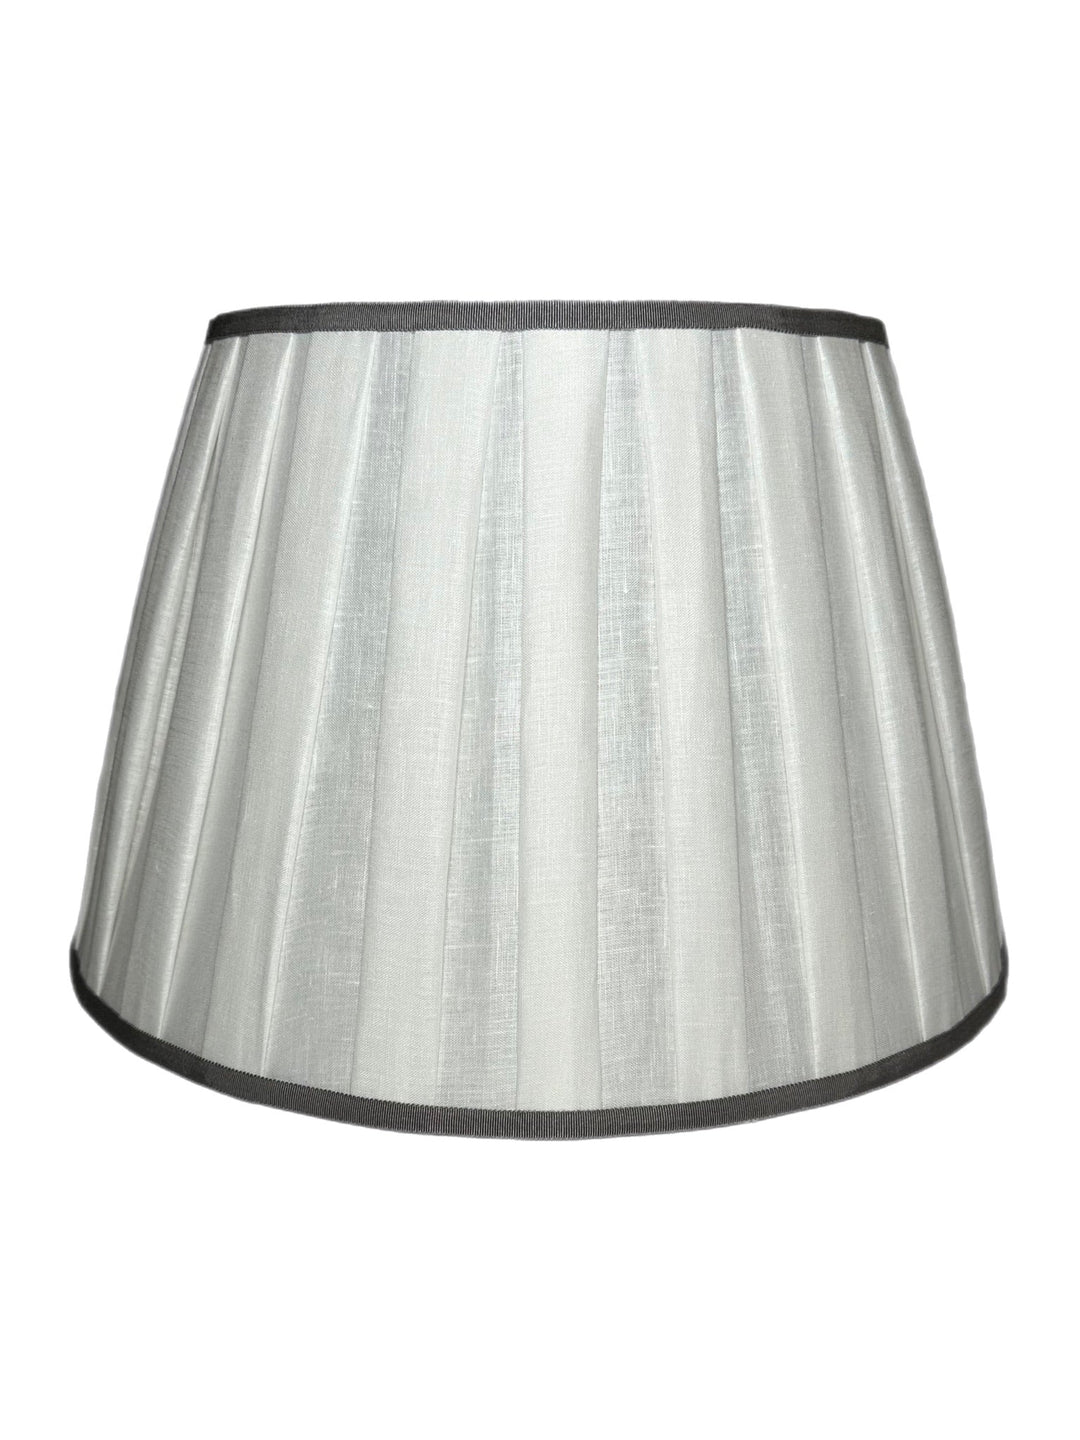 Box Pleat Linen Pembroke Lamp Shades Curated - Available in five sizes - Lux Lamp Shades